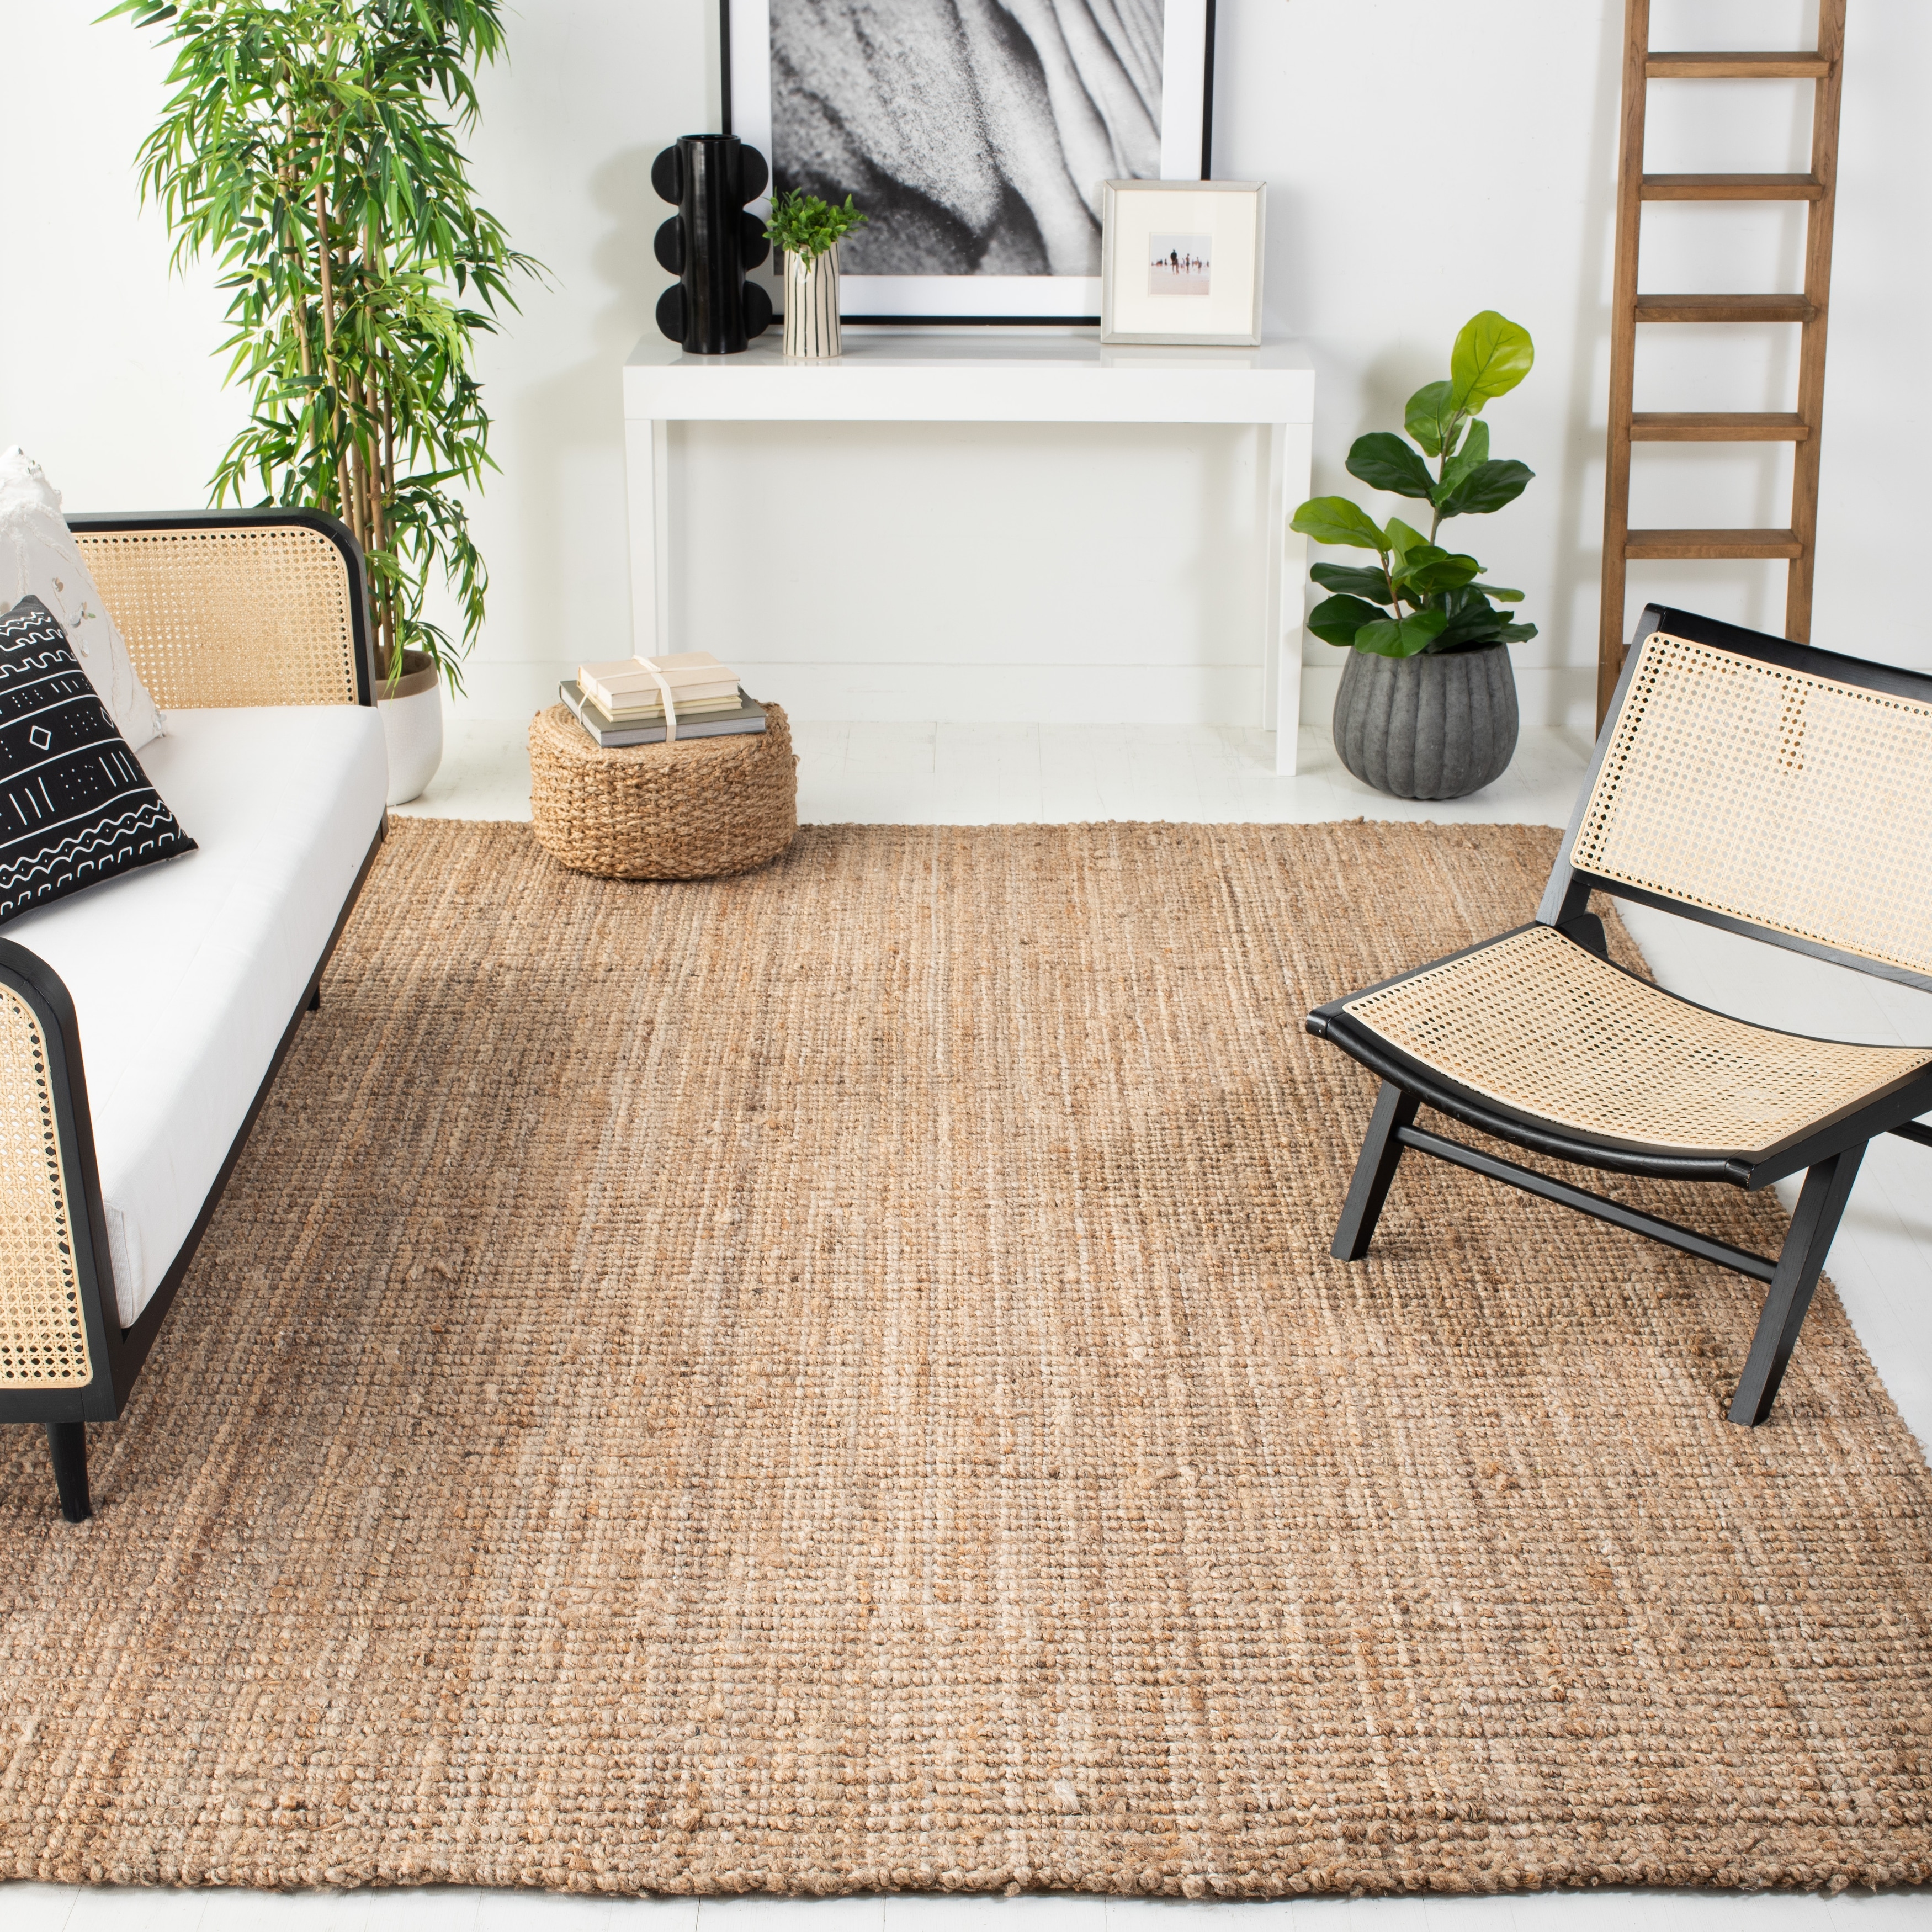 How to Clean a Jute Rug in 4 Steps